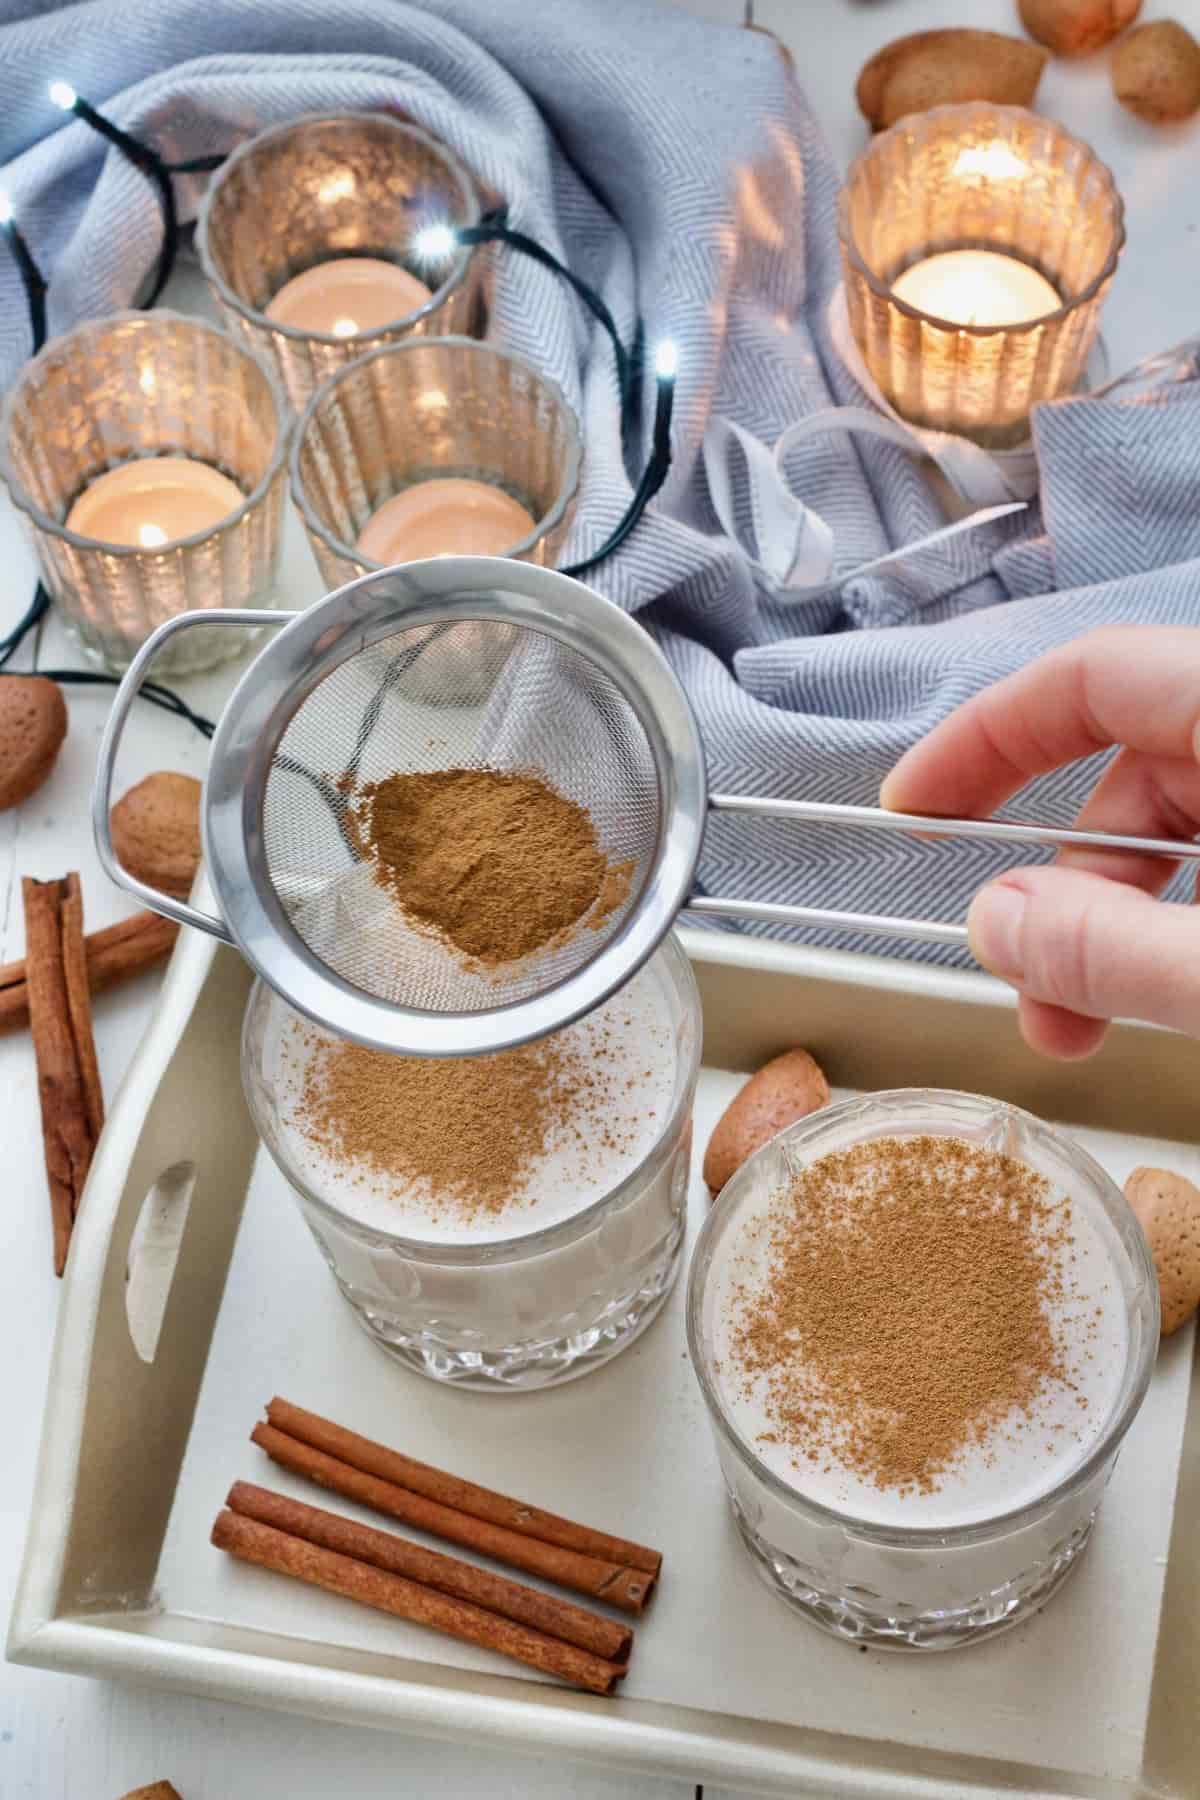 Hand holding small sieve with ground cinnamon in it over the glasses.